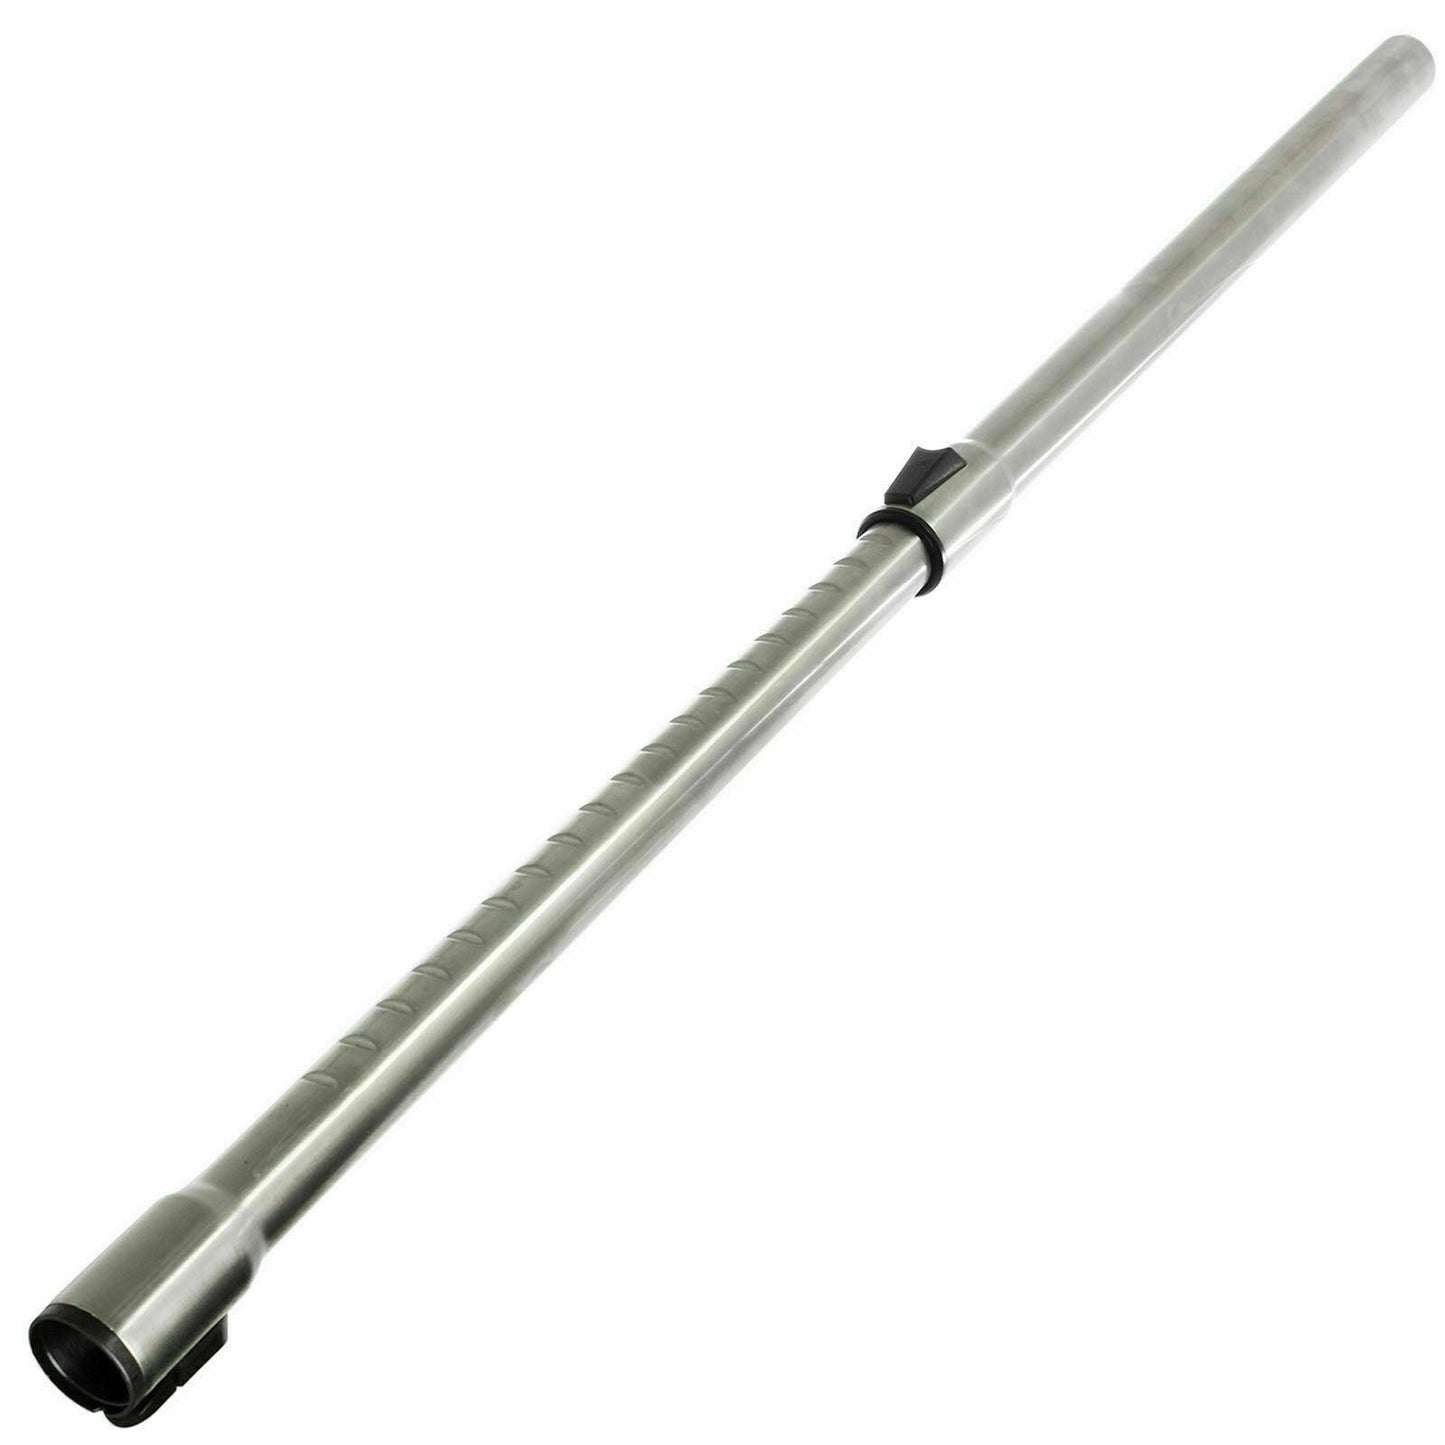 Telescopic Extension Tube Pipe Rod For Miele S5210 S4812 S5980 SEB217 Sparesbarn